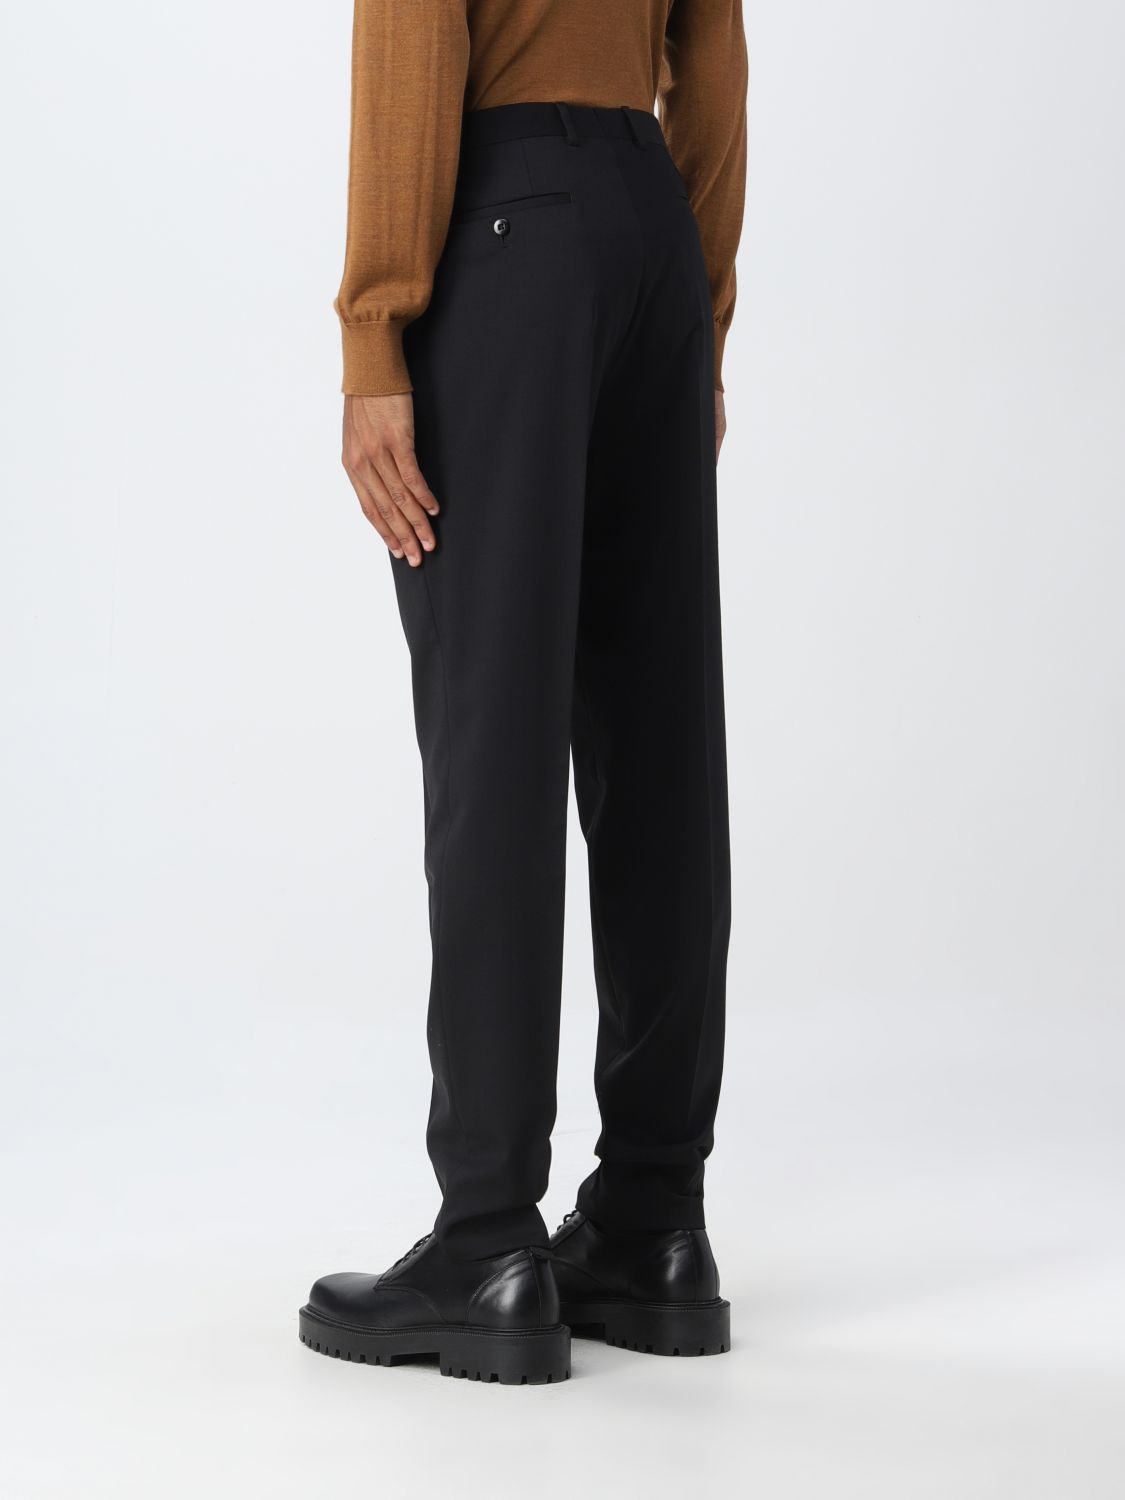 Trousers Zegna: Zegna trousers for men black 3